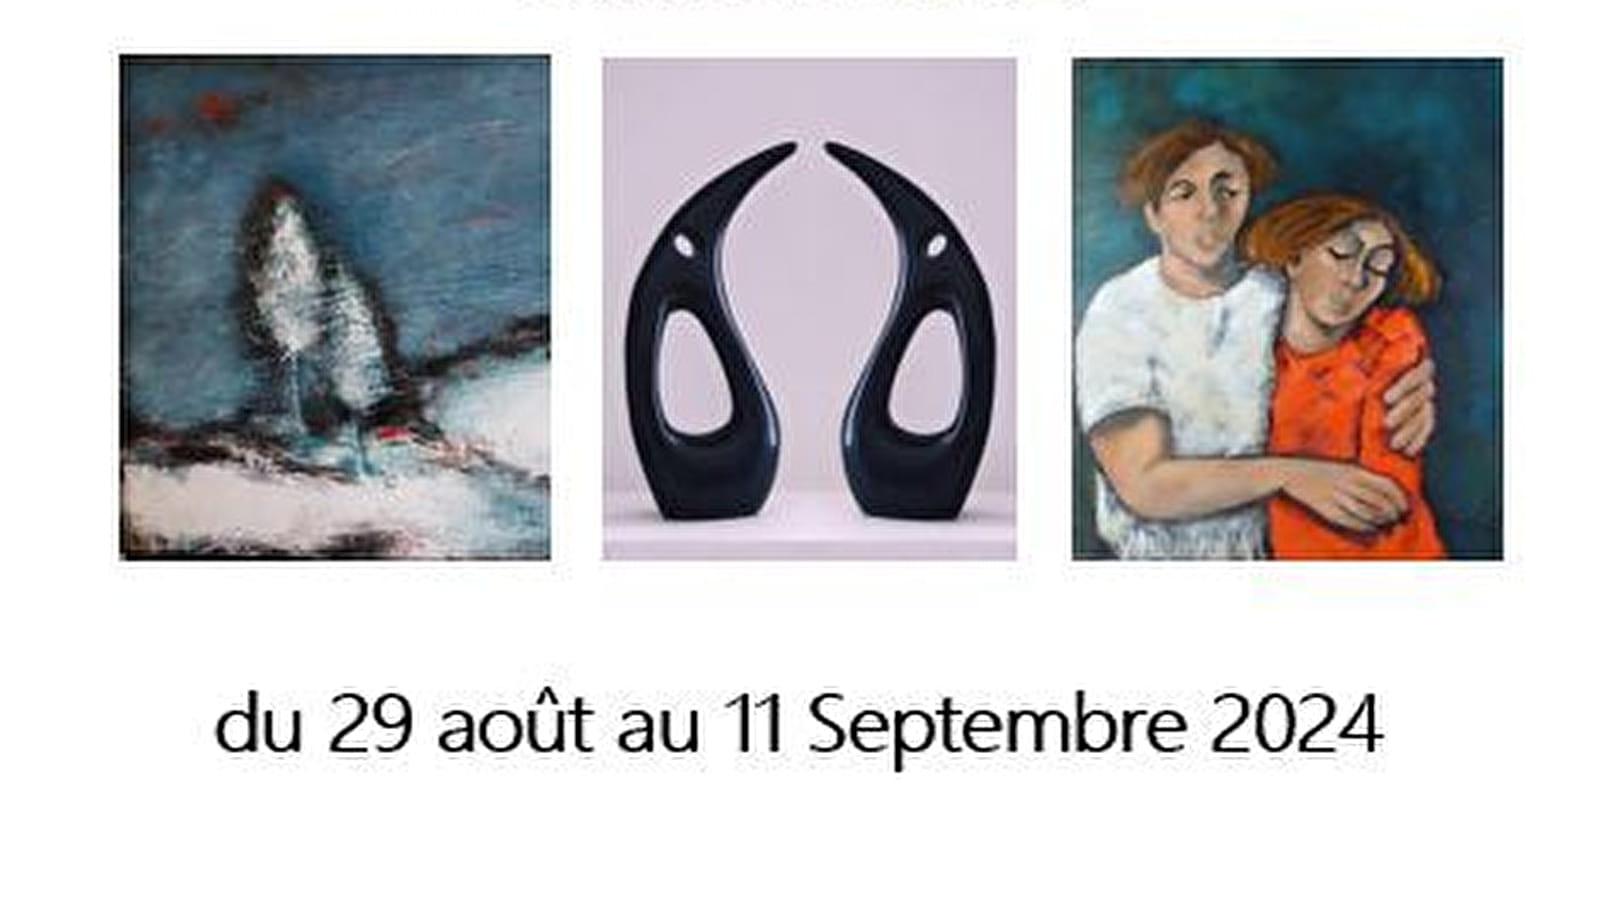 Tentoonstelling Patricia Delorme - Annette Pral - Jean-Yves Petit